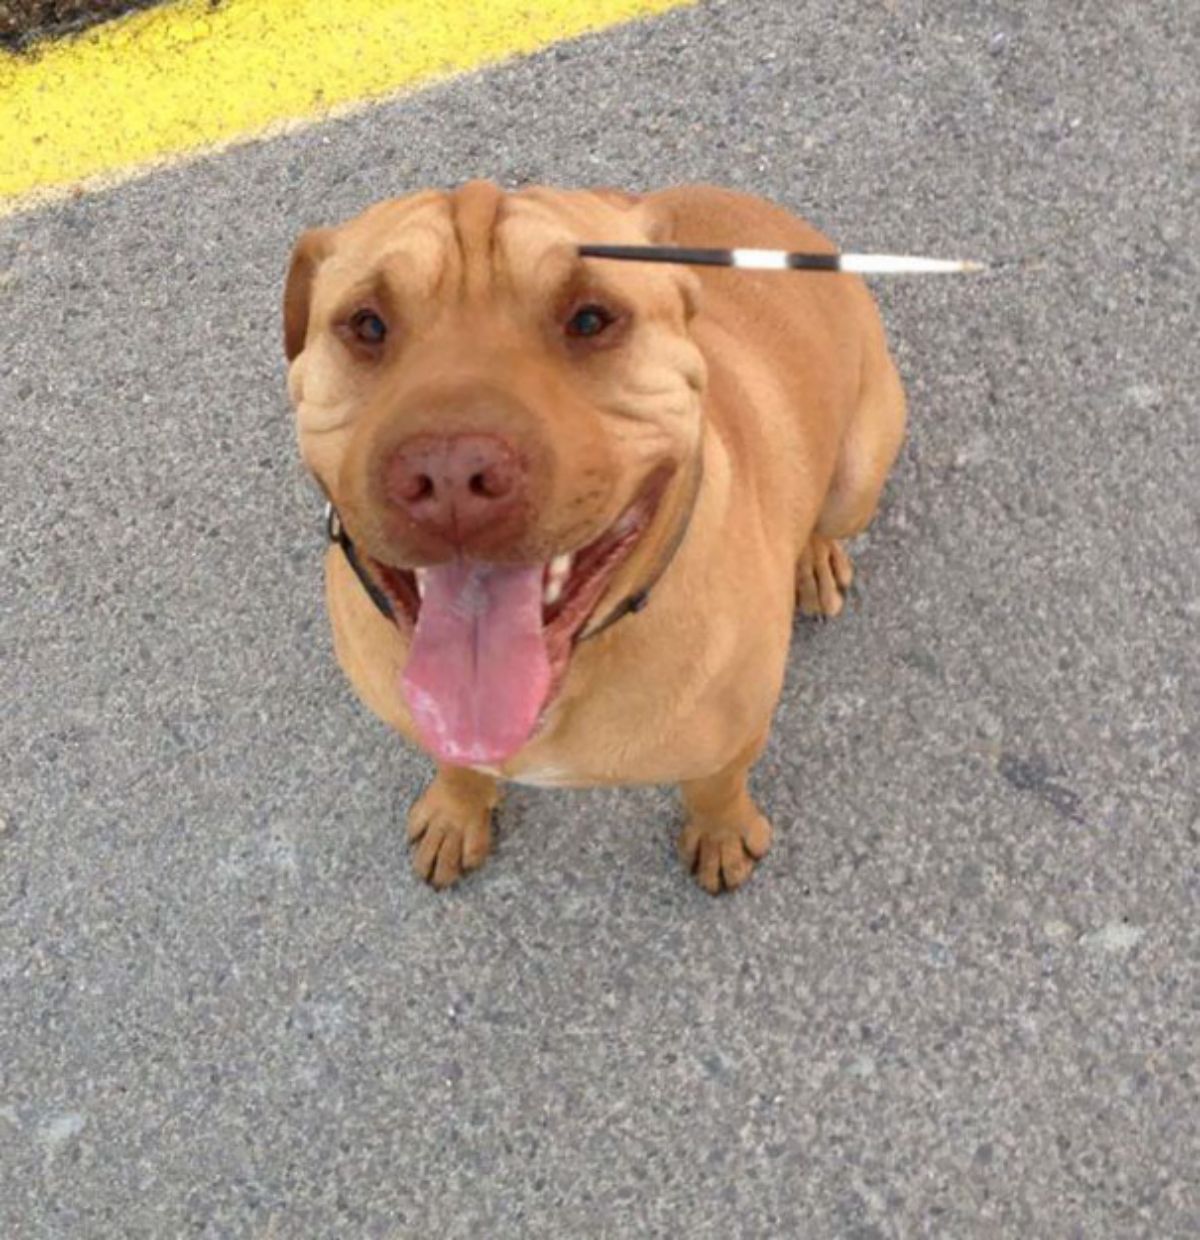 brown dog sitting on the road with a black and white long porcupine quill stuck over the left eye